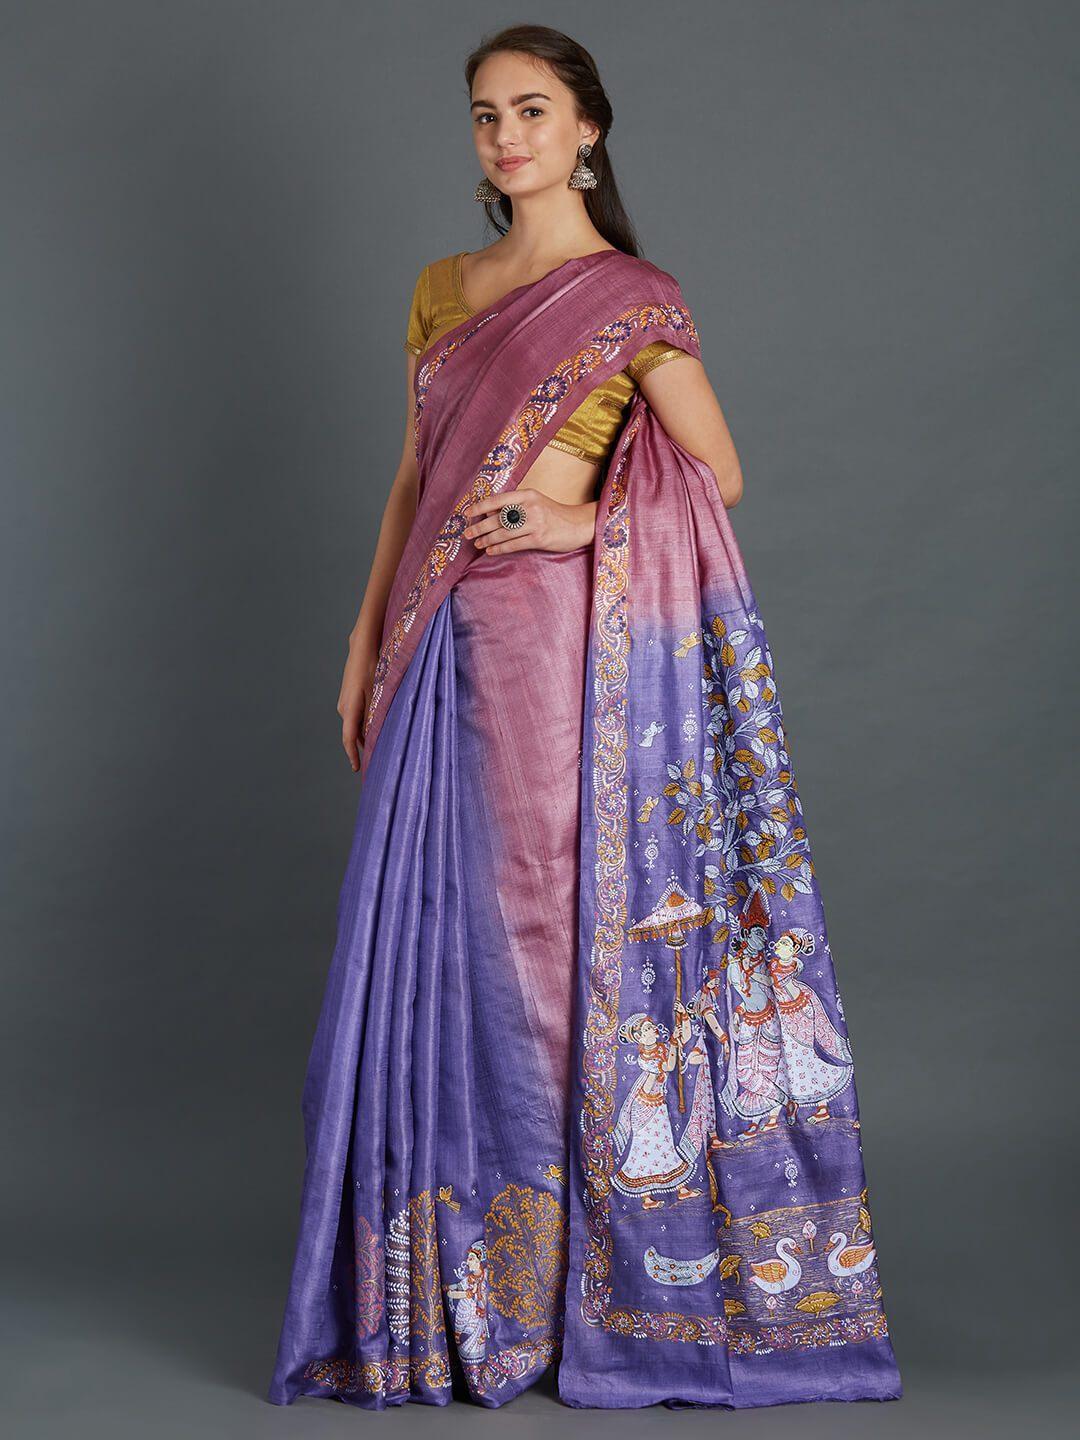 CraftsCollection.in - Double Colour Tussar Silk Saree with handpainted Pattachitra motifs